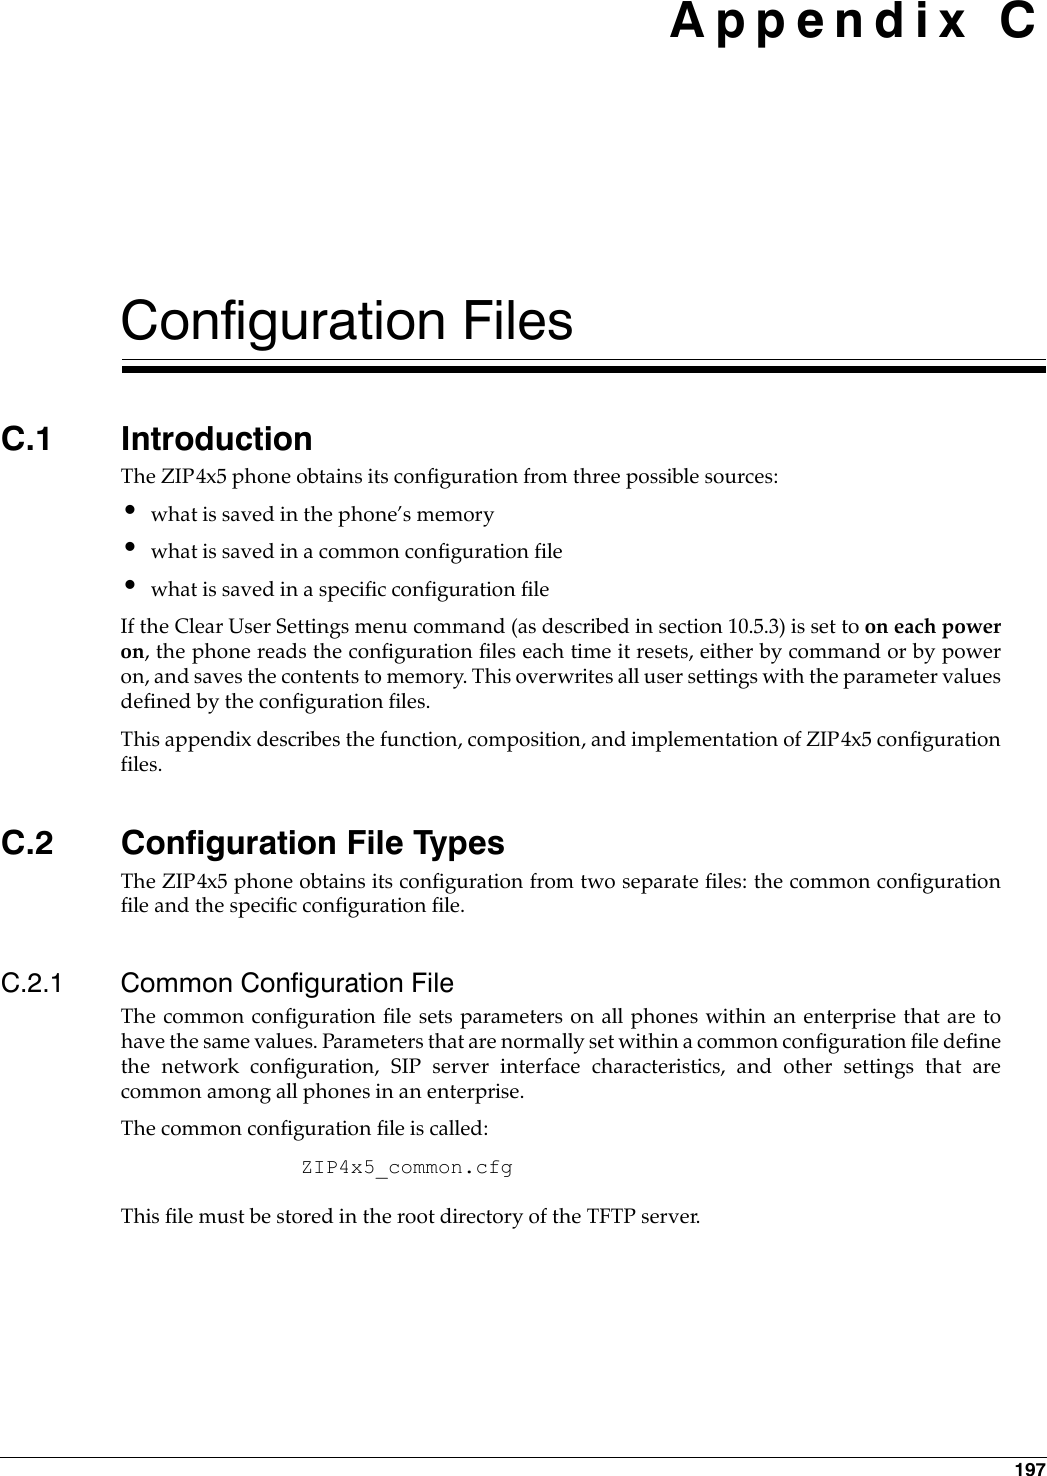 197 Appendix CConfiguration FilesC.1 IntroductionThe ZIP4x5 phone obtains its configuration from three possible sources:•what is saved in the phone’s memory•what is saved in a common configuration file•what is saved in a specific configuration fileIf the Clear User Settings menu command (as described in section 10.5.3) is set to on each poweron, the phone reads the configuration files each time it resets, either by command or by poweron, and saves the contents to memory. This overwrites all user settings with the parameter valuesdefined by the configuration files.This appendix describes the function, composition, and implementation of ZIP4x5 configurationfiles.C.2 Configuration File TypesThe ZIP4x5 phone obtains its configuration from two separate files: the common configurationfile and the specific configuration file.C.2.1 Common Configuration FileThe common configuration file sets parameters on all phones within an enterprise that are tohave the same values. Parameters that are normally set within a common configuration file definethe network configuration, SIP server interface characteristics, and other settings that arecommon among all phones in an enterprise. The common configuration file is called: ZIP4x5_common.cfgThis file must be stored in the root directory of the TFTP server.